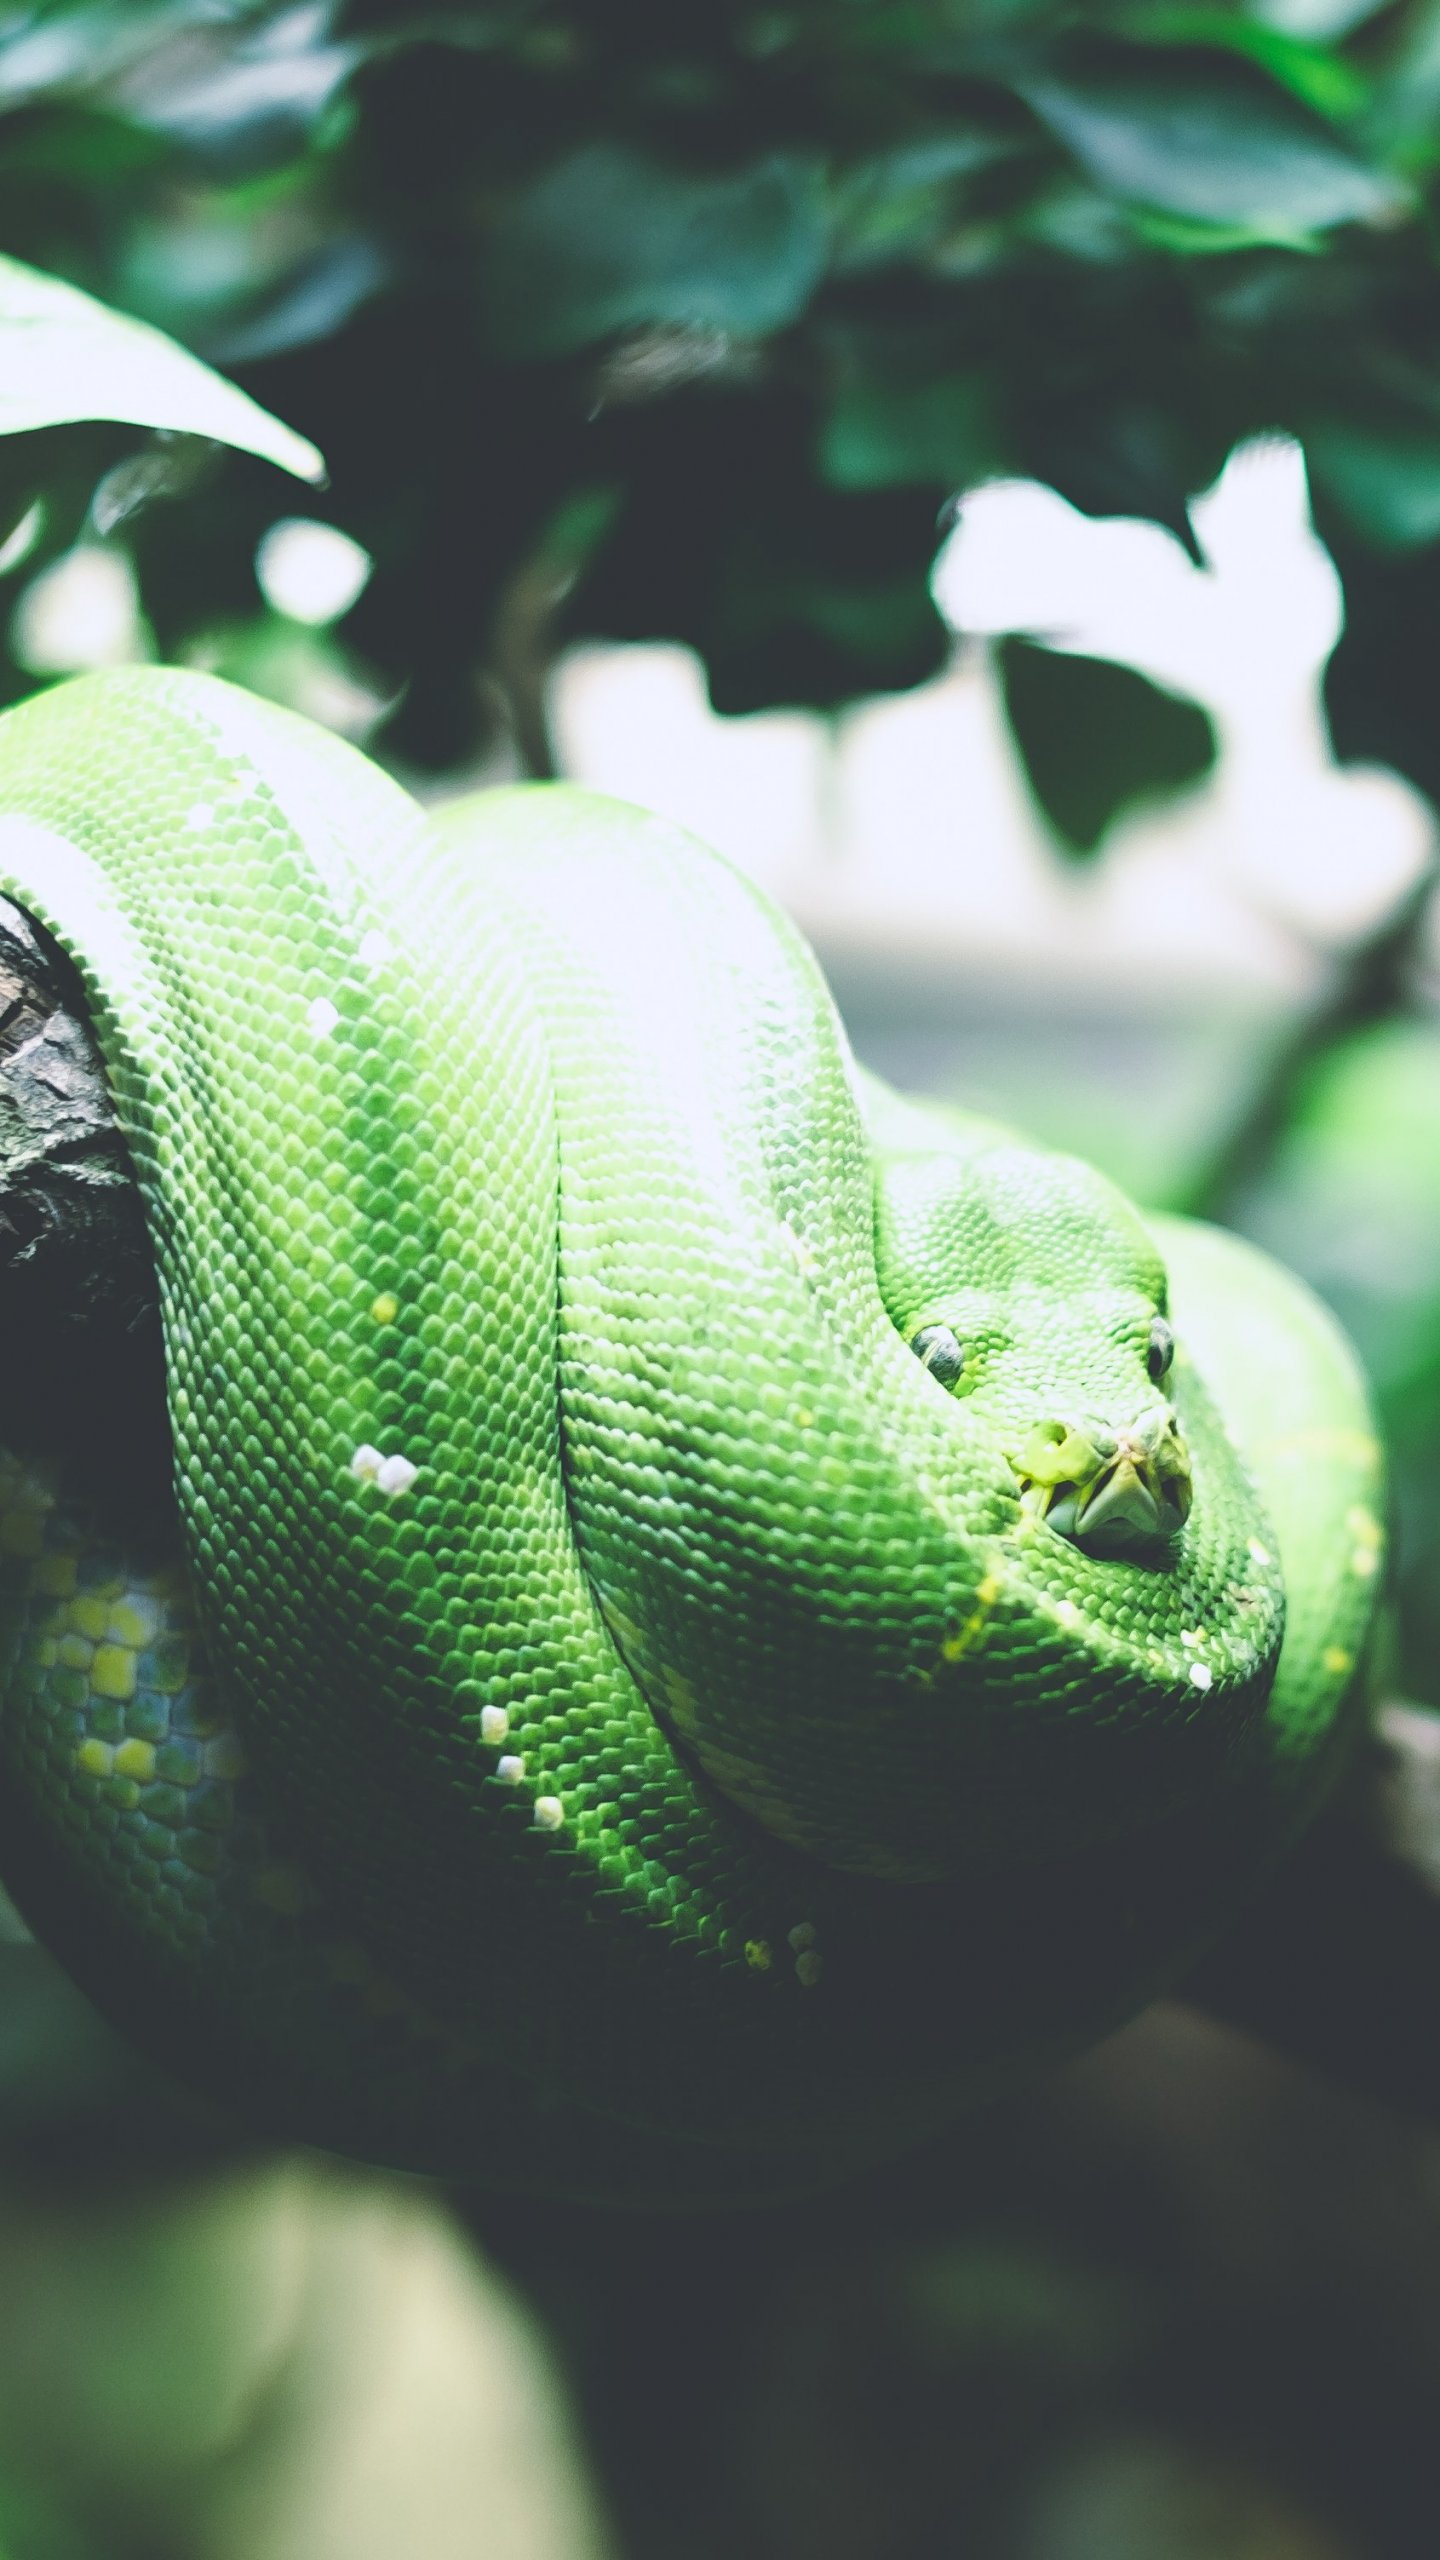 Tree Snake Wallpaper - iPhone, Android & Desktop Backgrounds